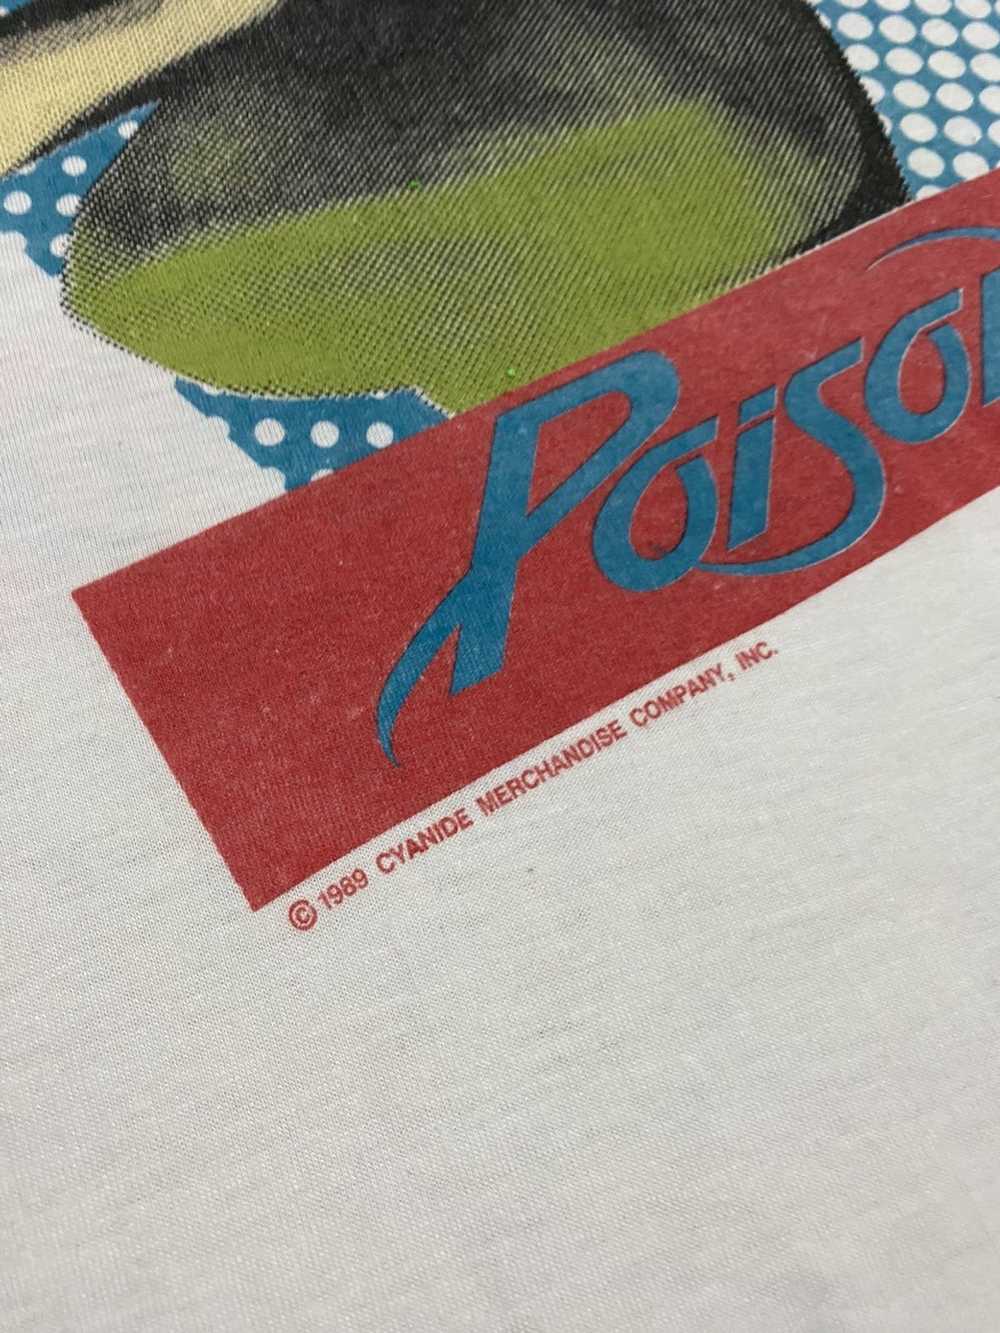 Band Tees × Made In Usa × Vintage Poison Scream t… - image 3